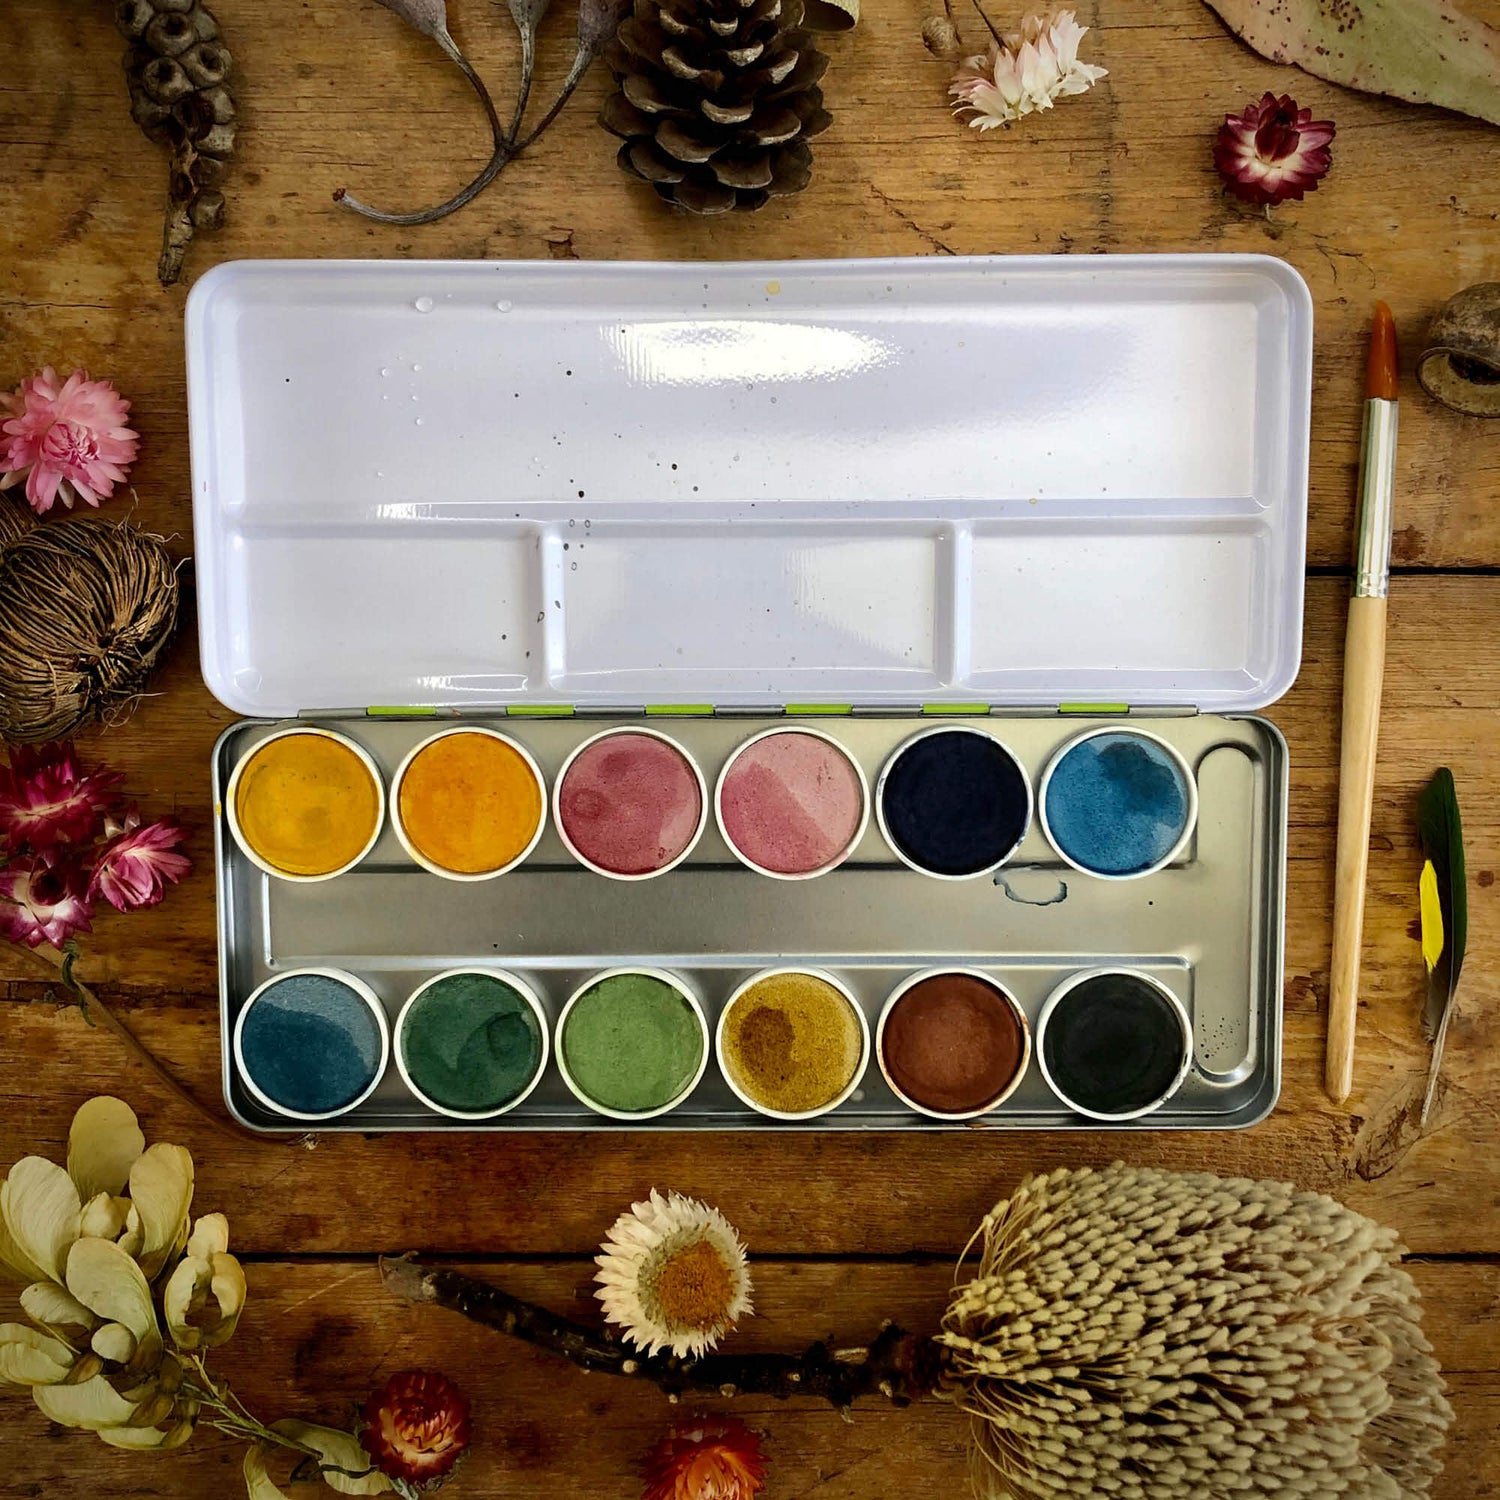 Metal tin, all natural, chemical free, plastic free, watercolour paint from Okonorm brand from Your Wild Books